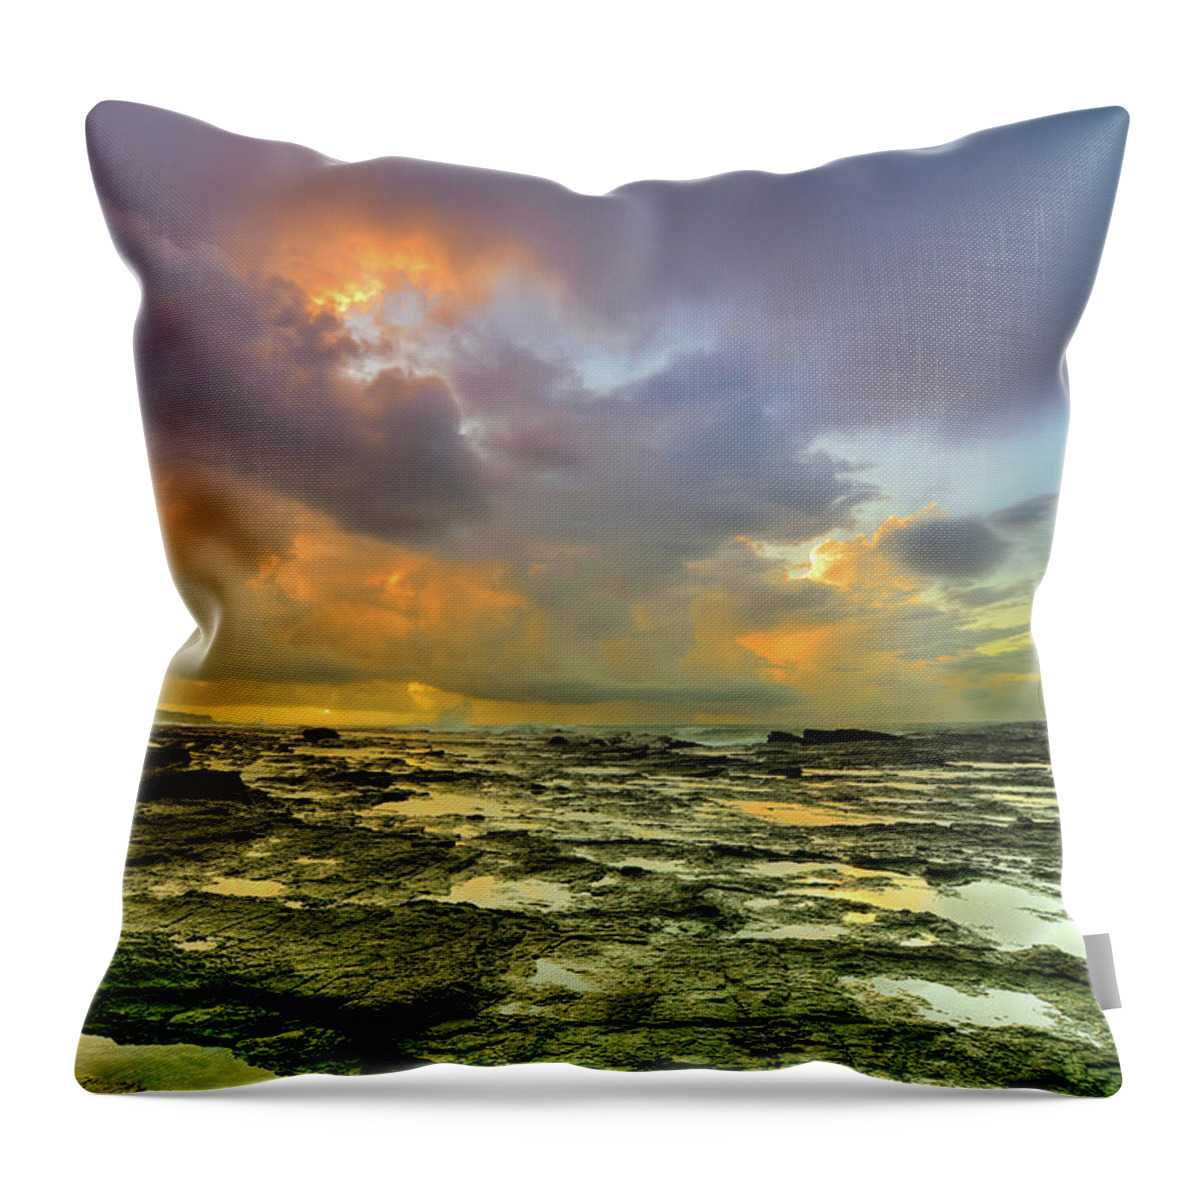 Scenics Throw Pillow featuring the photograph Cloudscape At Sea Side by Taiwan Nans0410